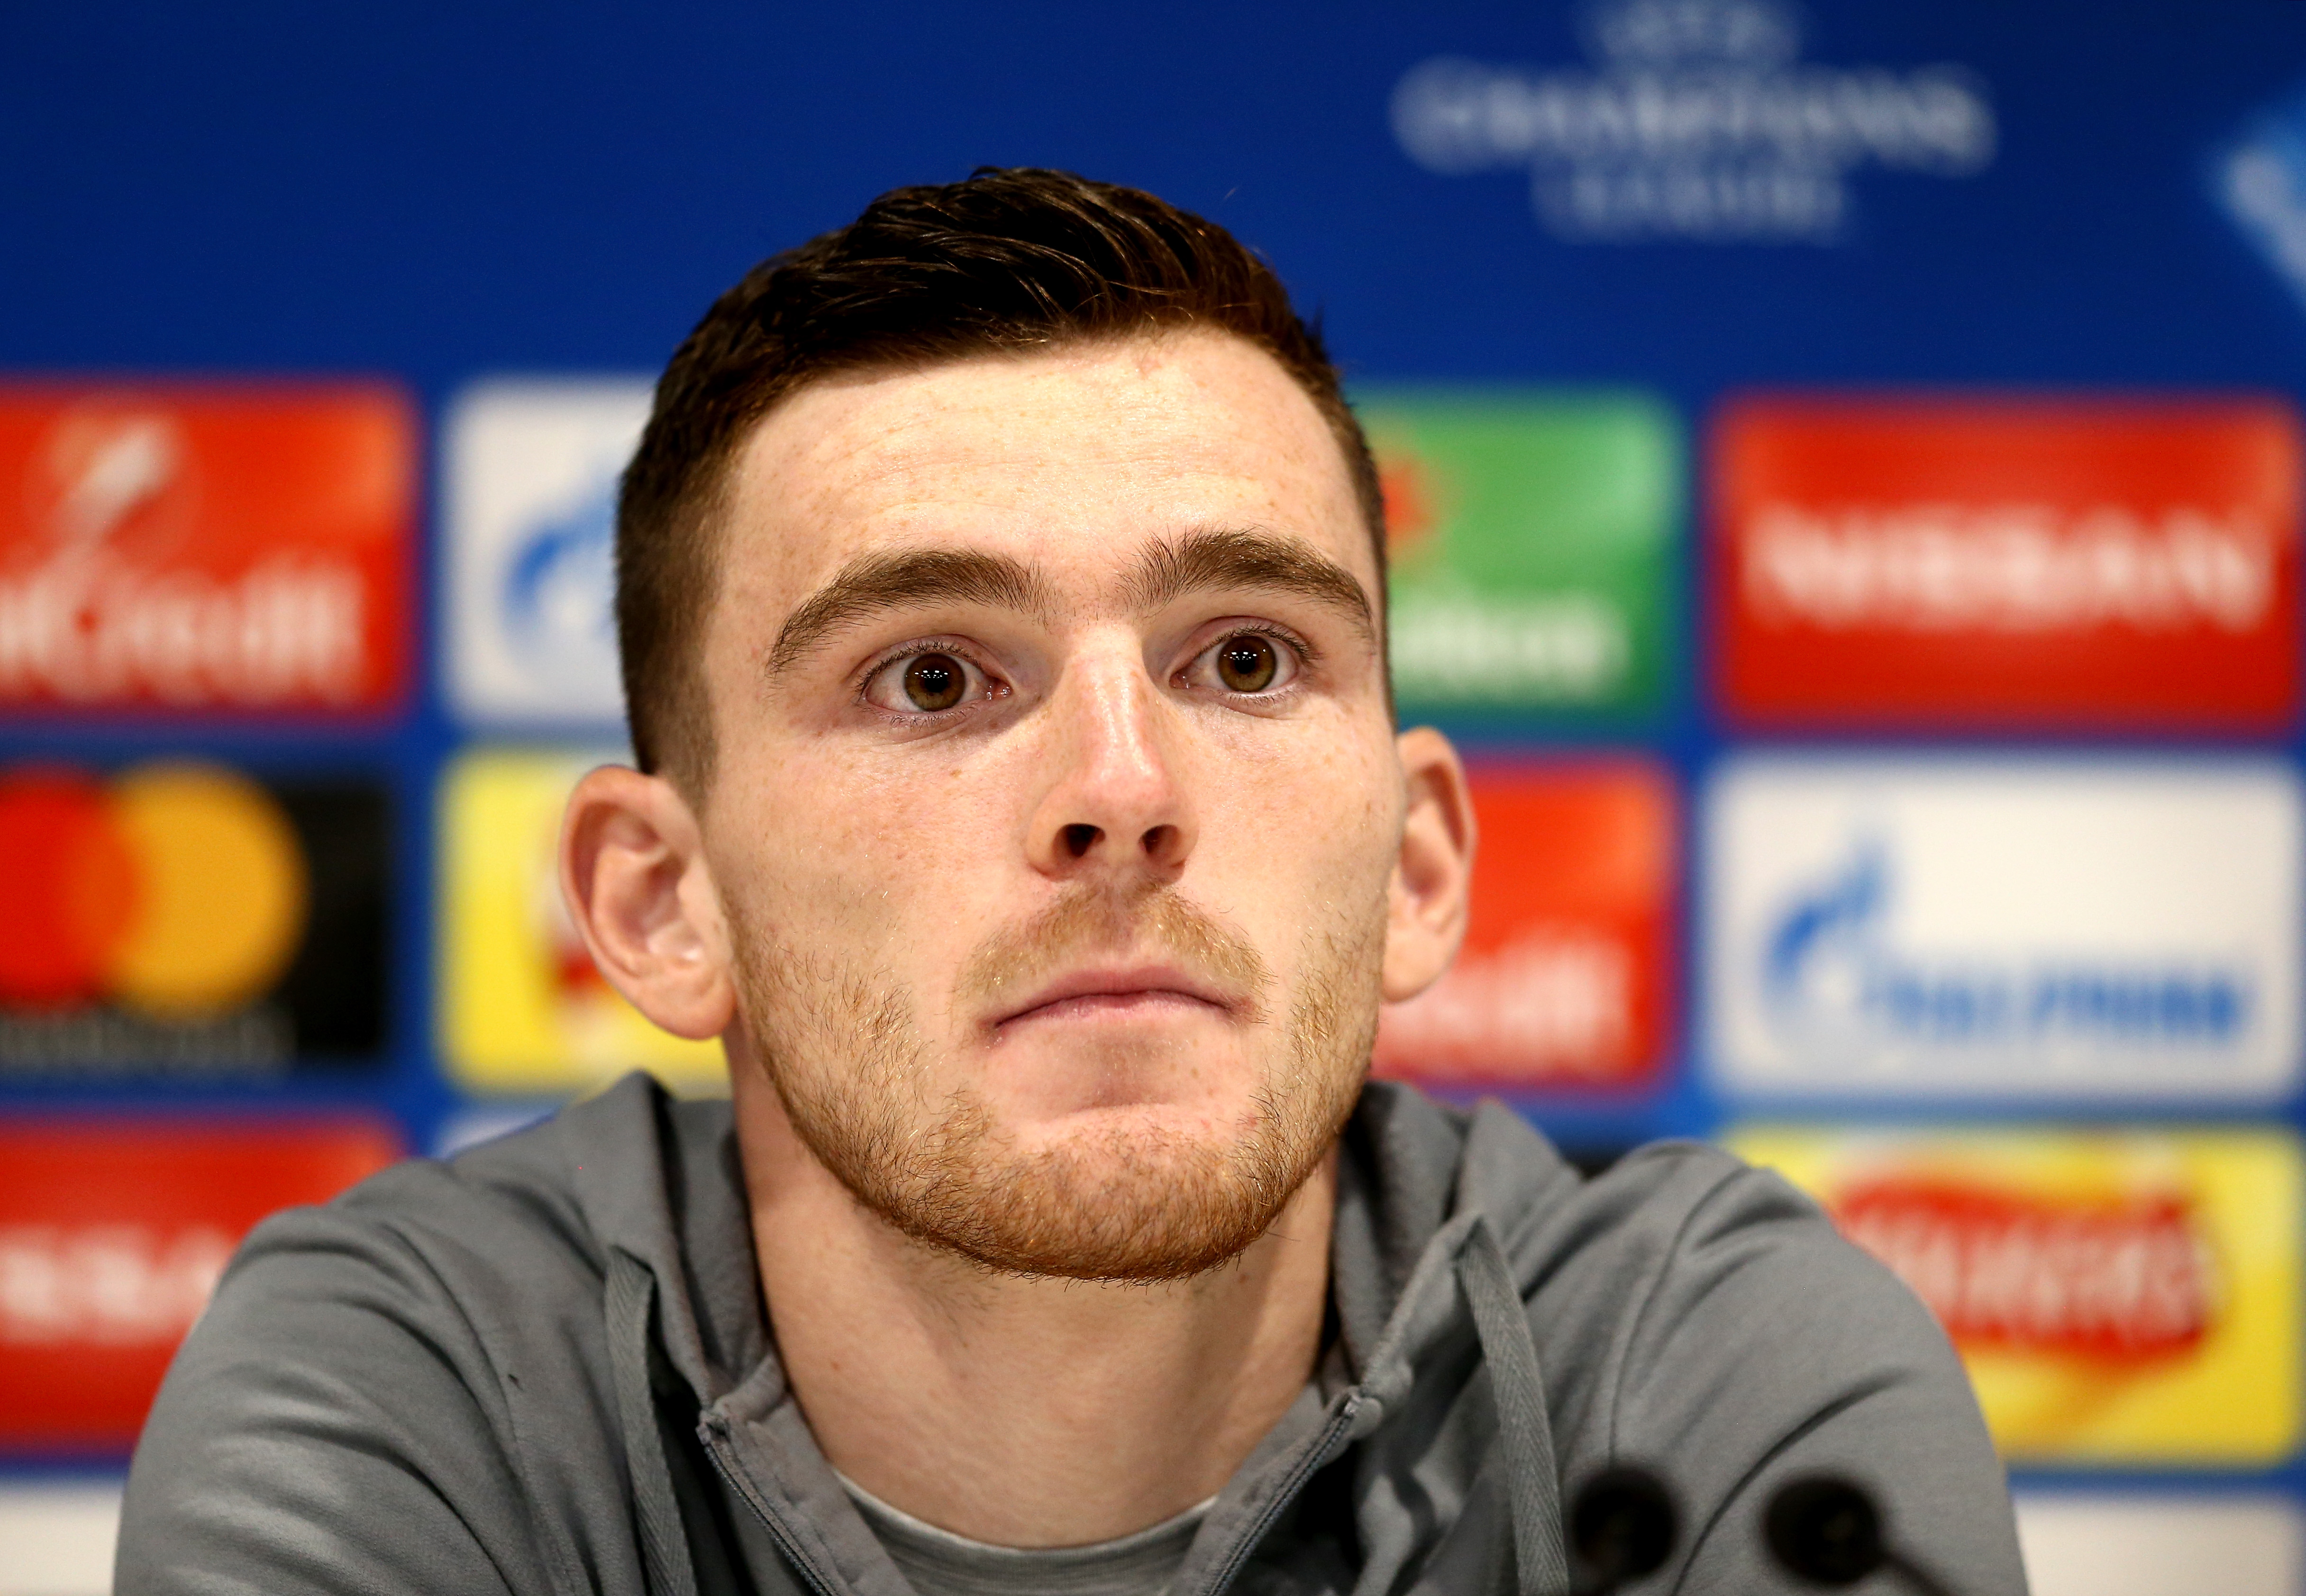 All eyes will be on captain Andrew Robertson when Scotland take the field at Hampden Park. (Photo by Jan Kruger/Getty Images)